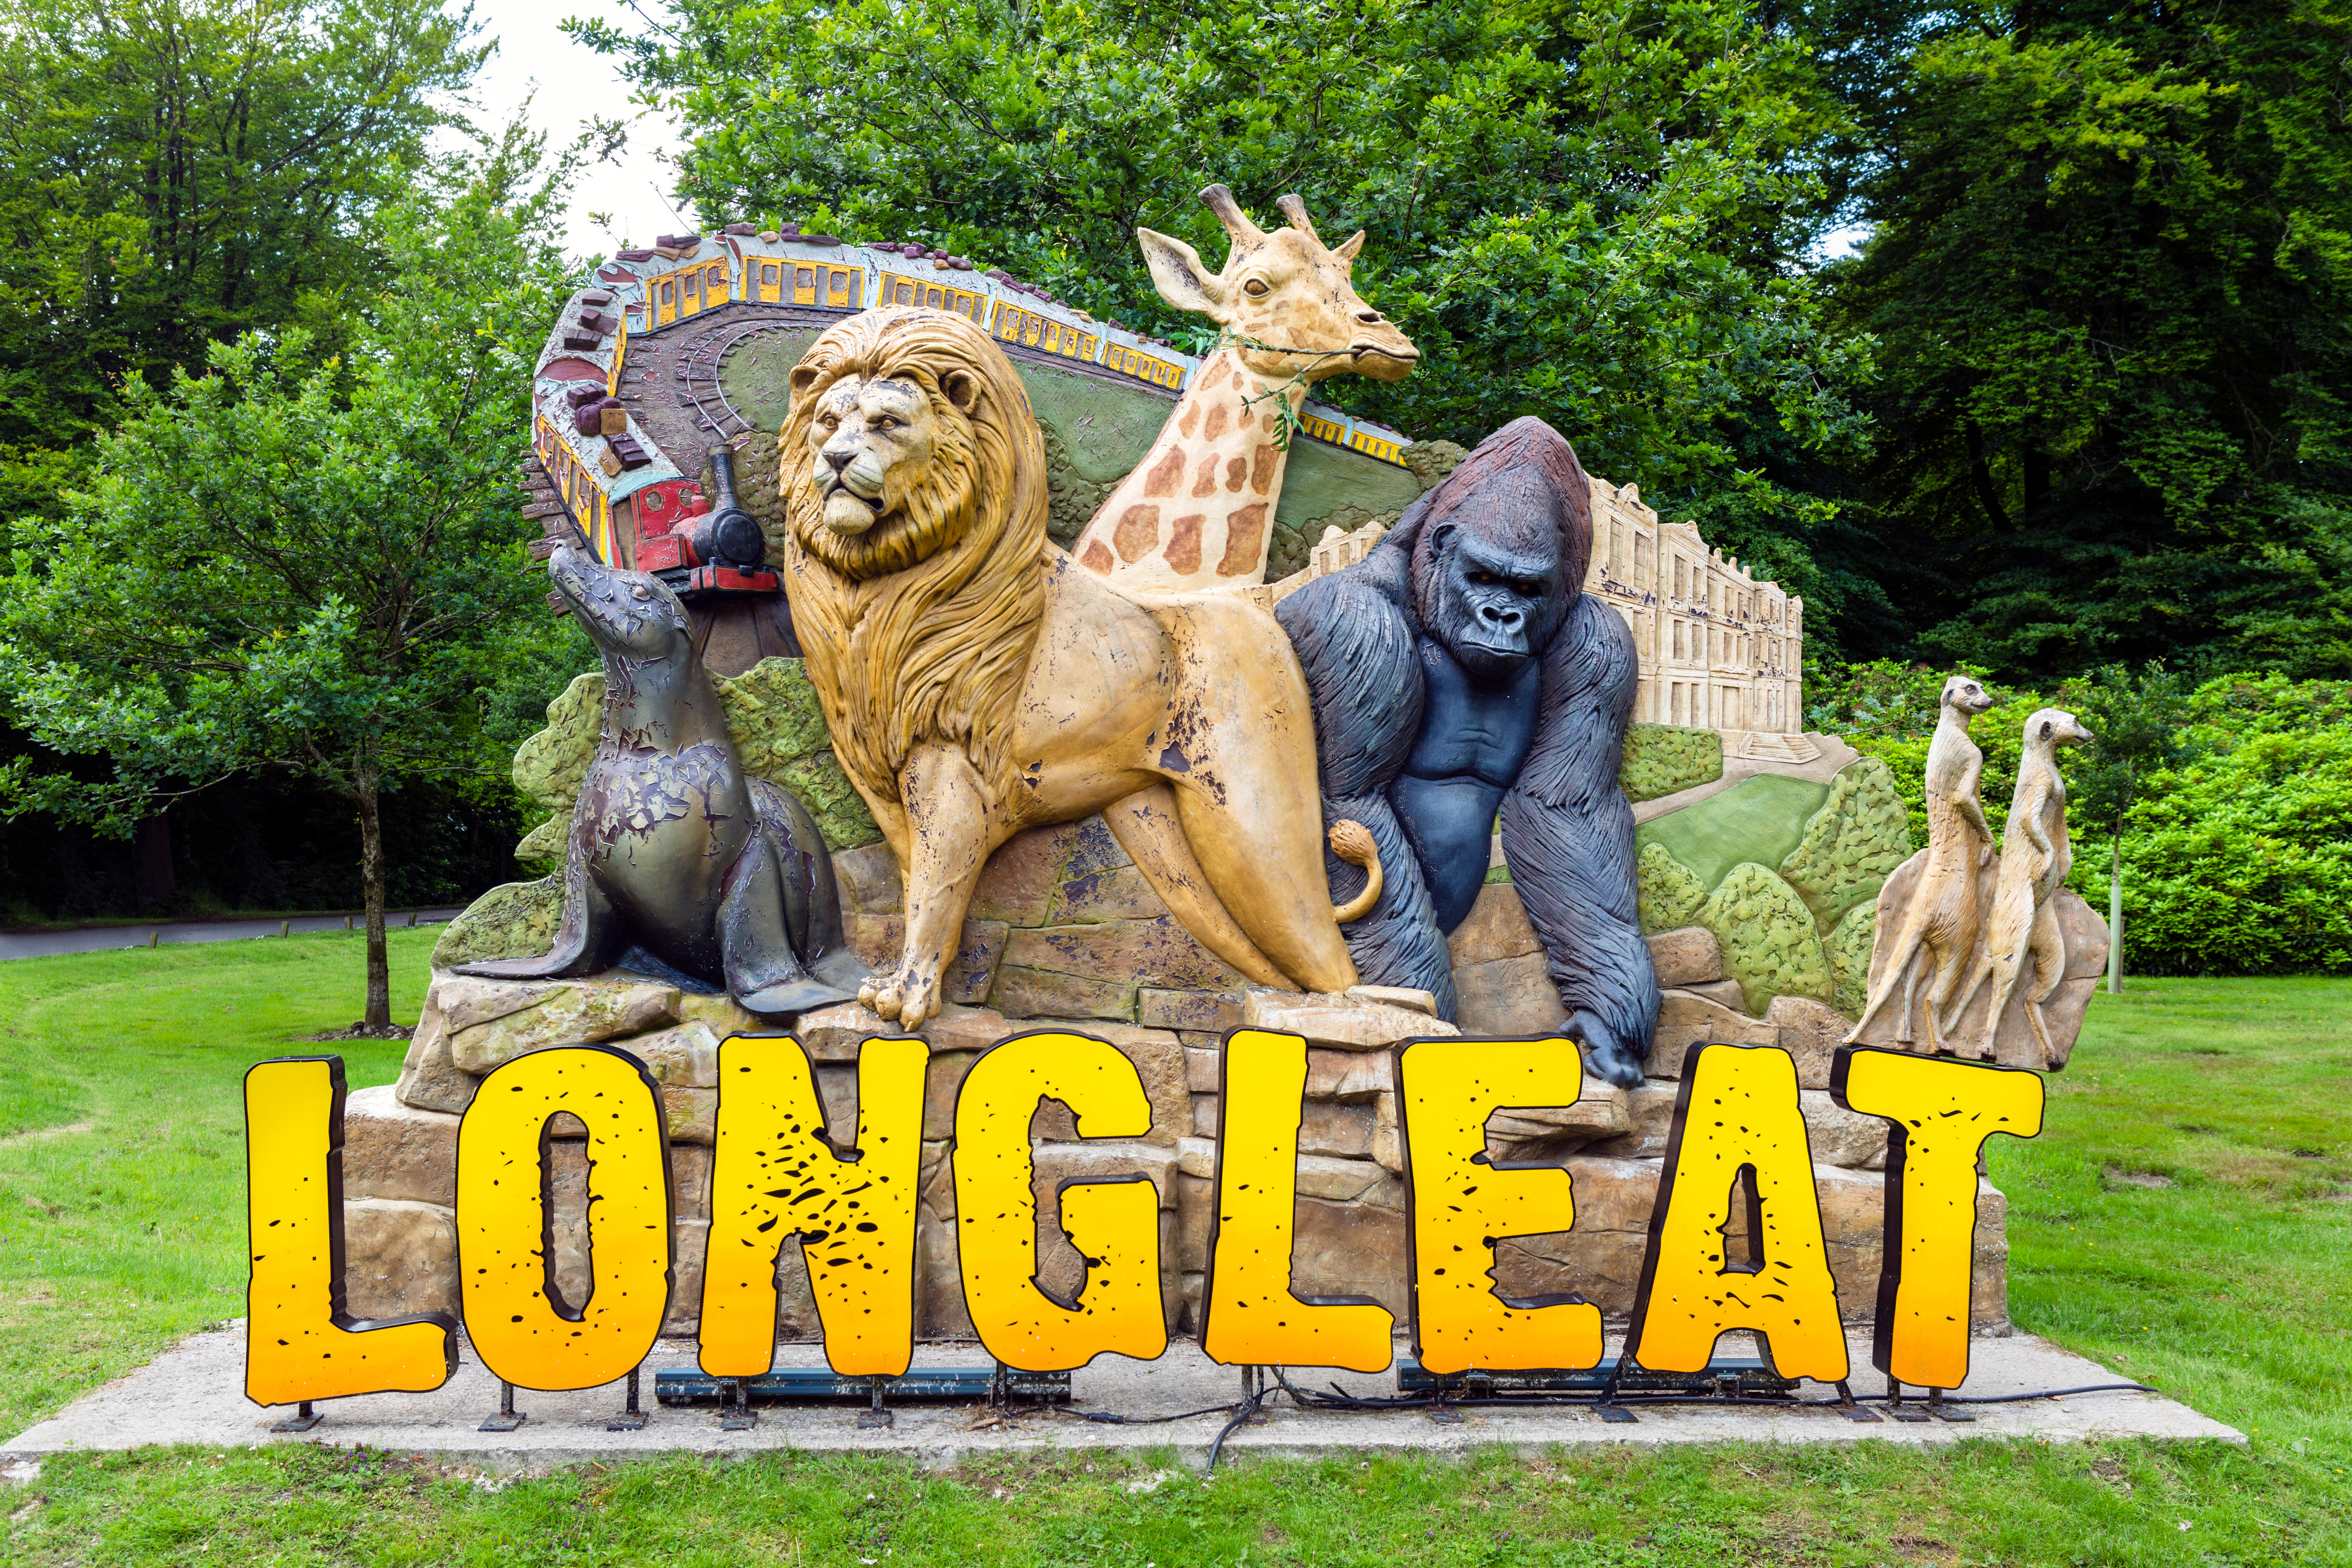 Longleat Safari and Adventure Park is located near Warminster in Wiltshire